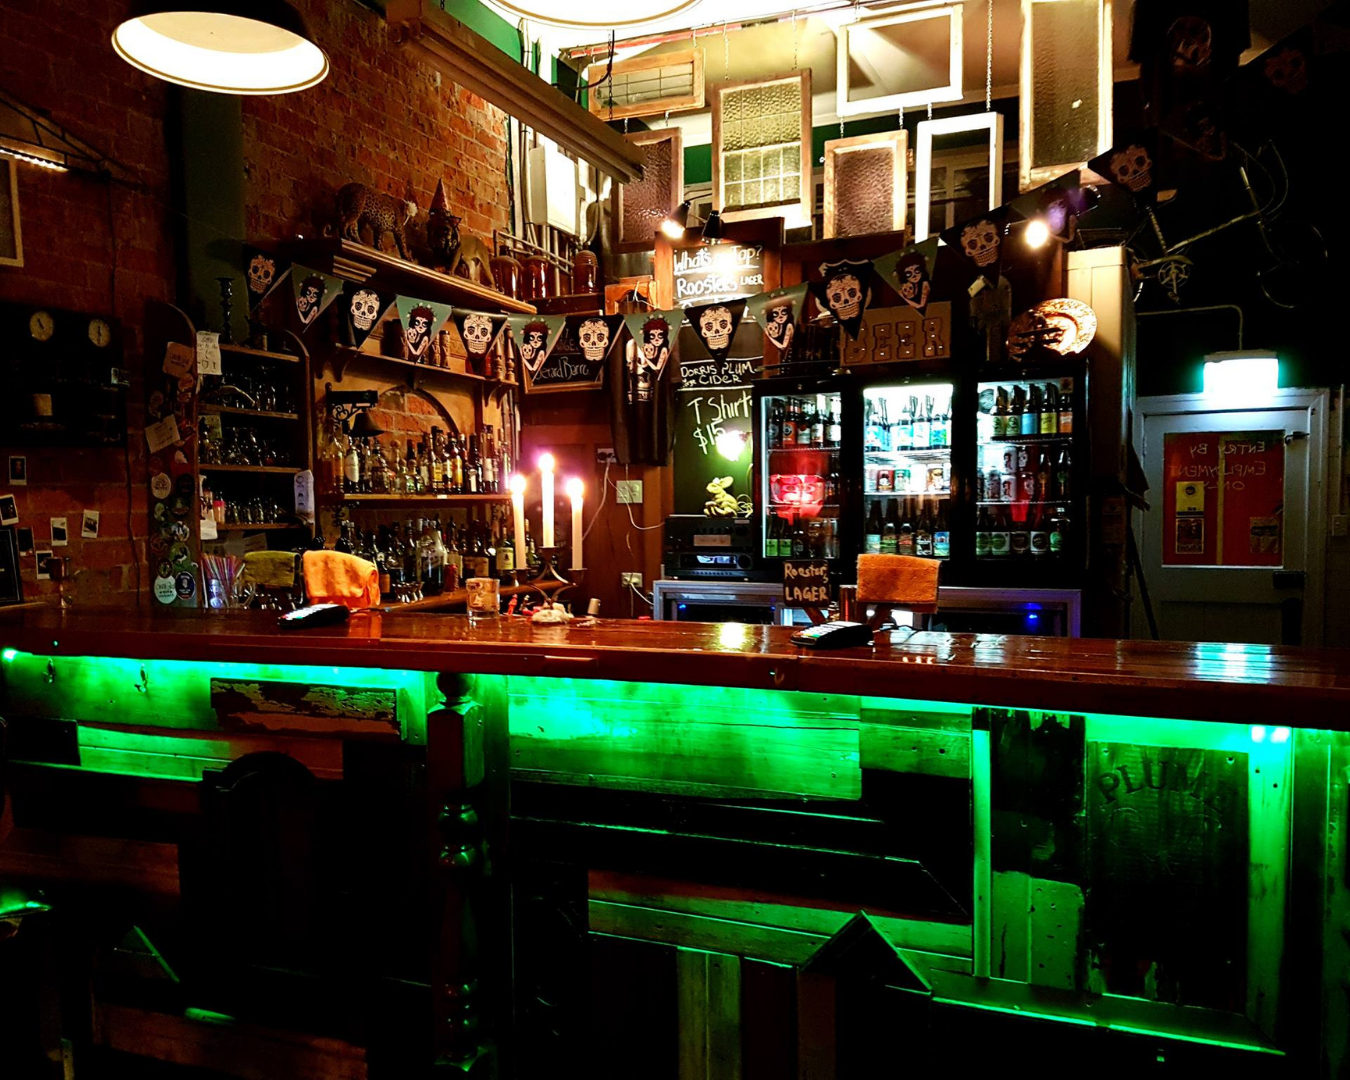 A dimly lit bar with neon lighting under the bar counters